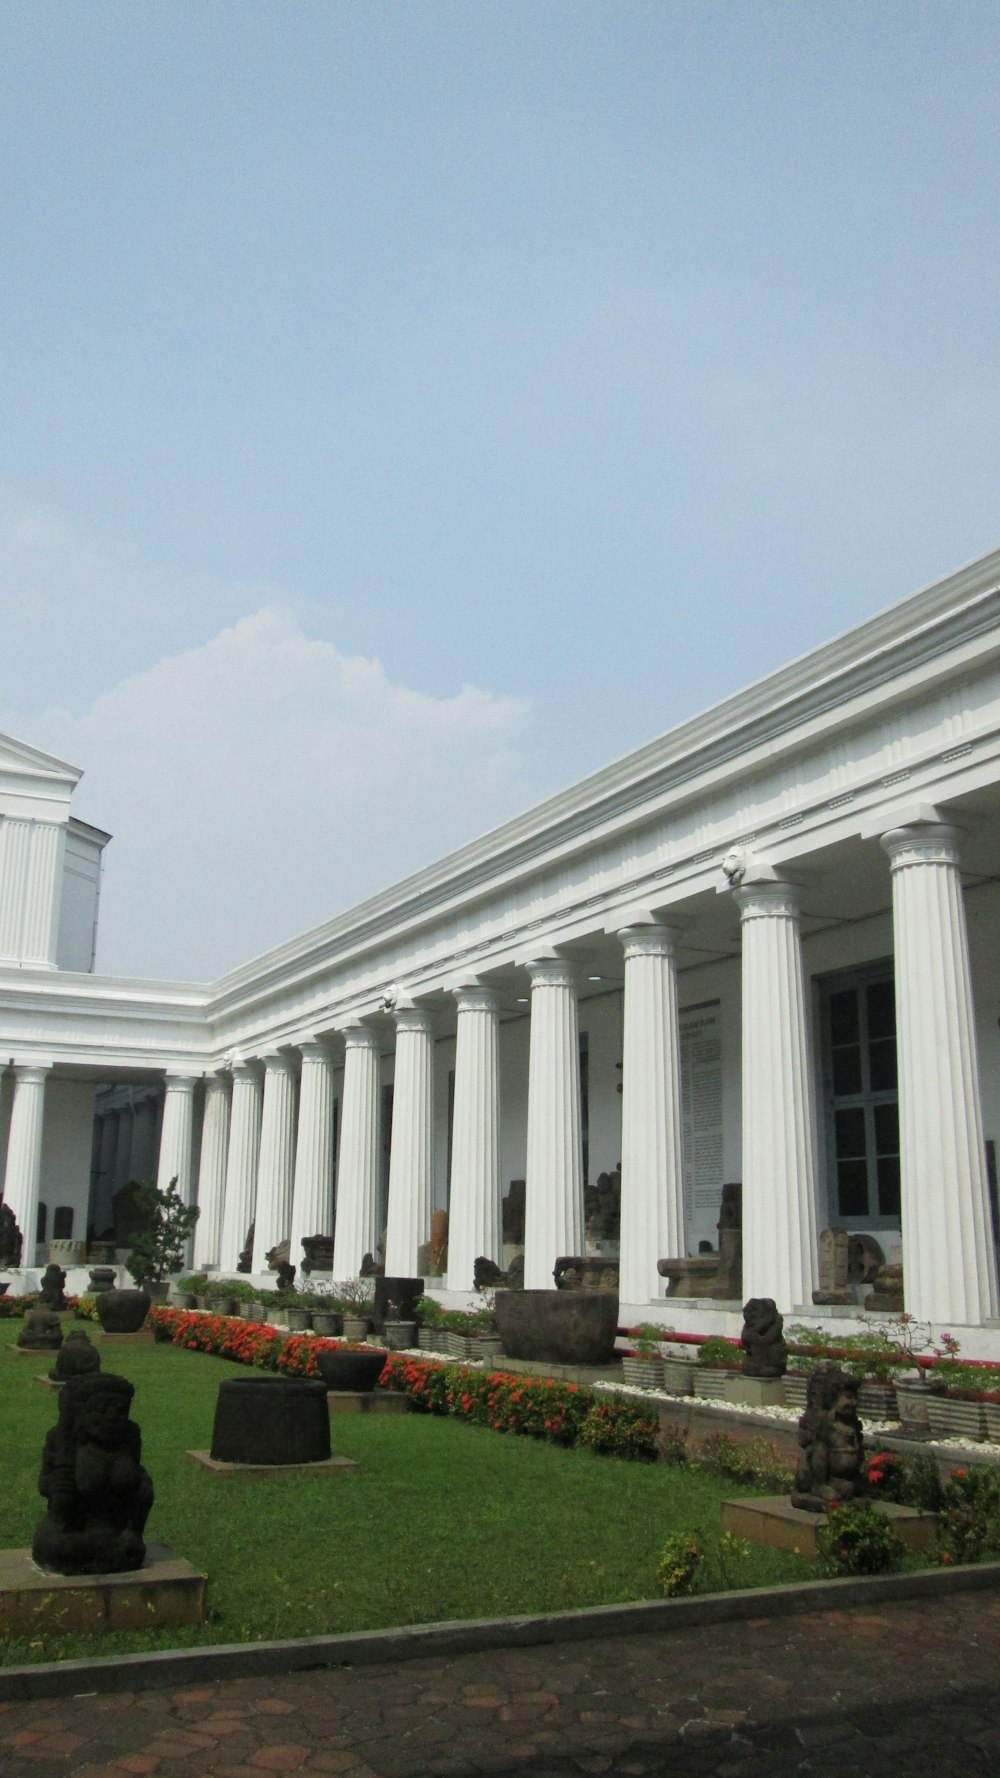 a building with columns and a lawn in front of it